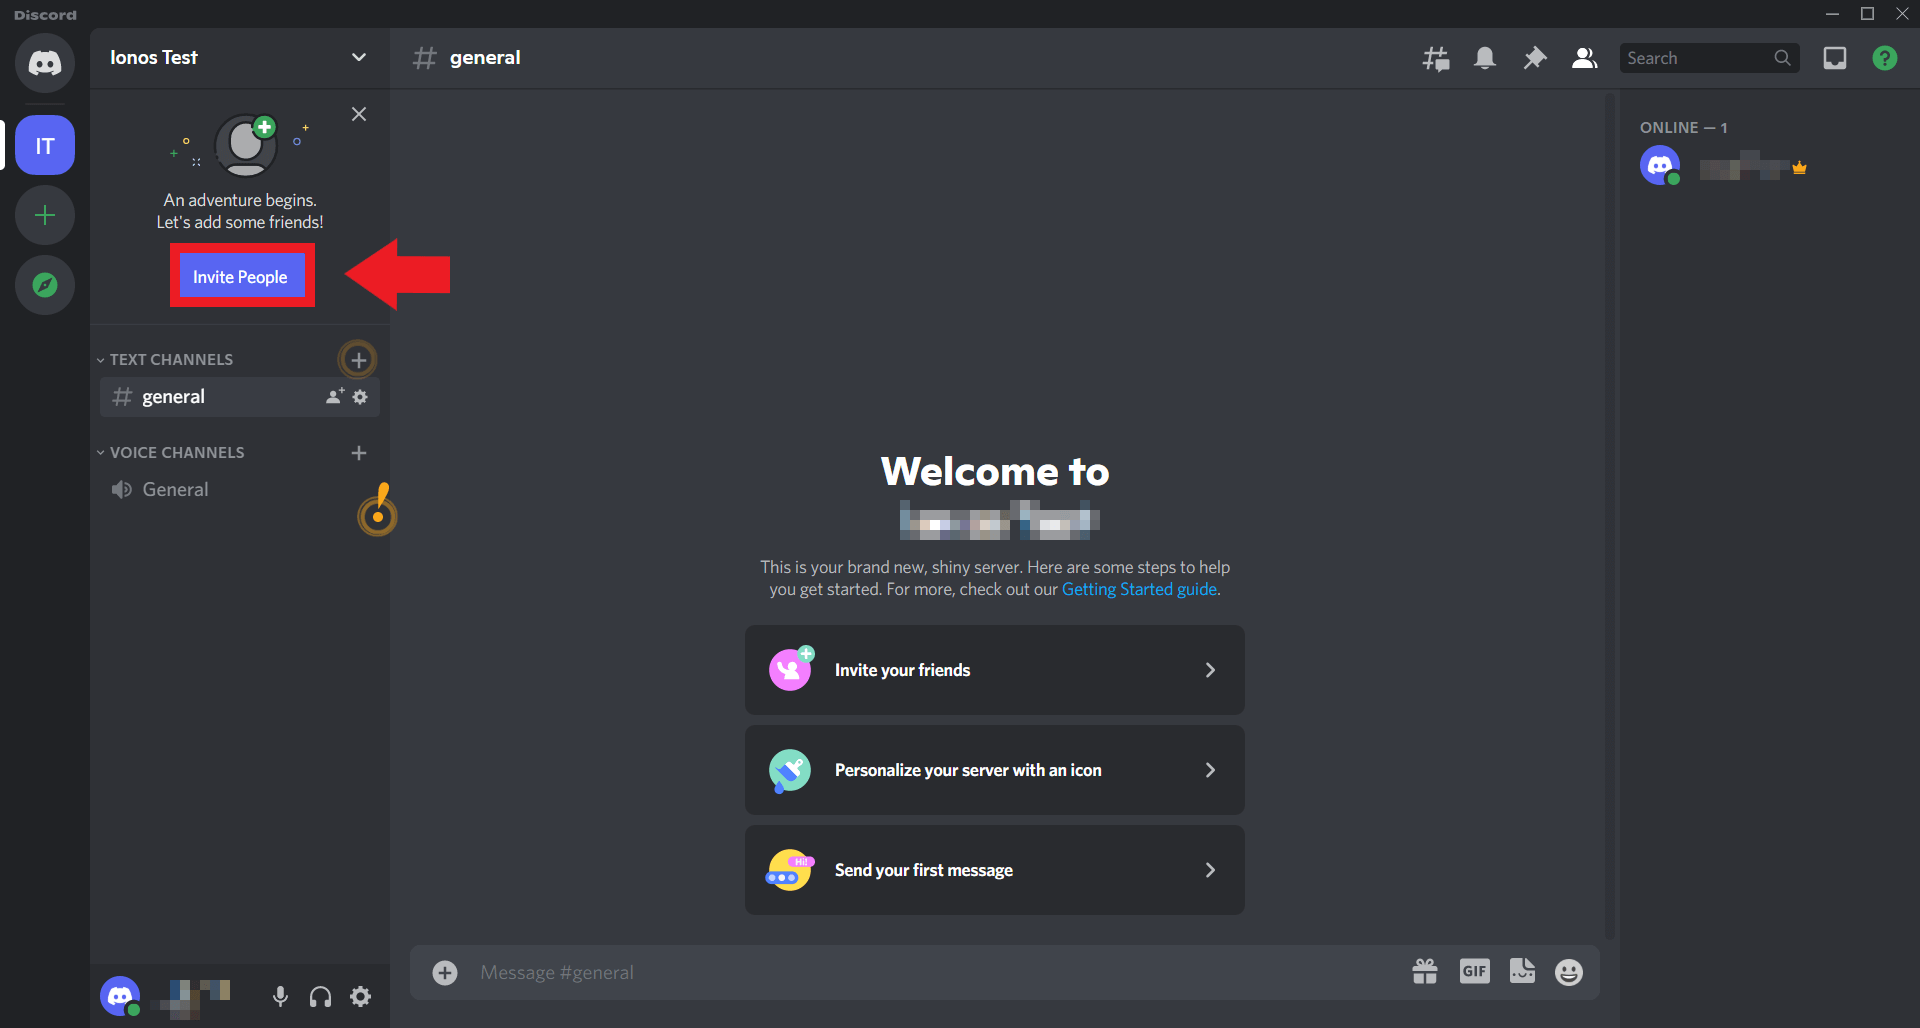 You can now invite your Discord friends and other users to your Discord server